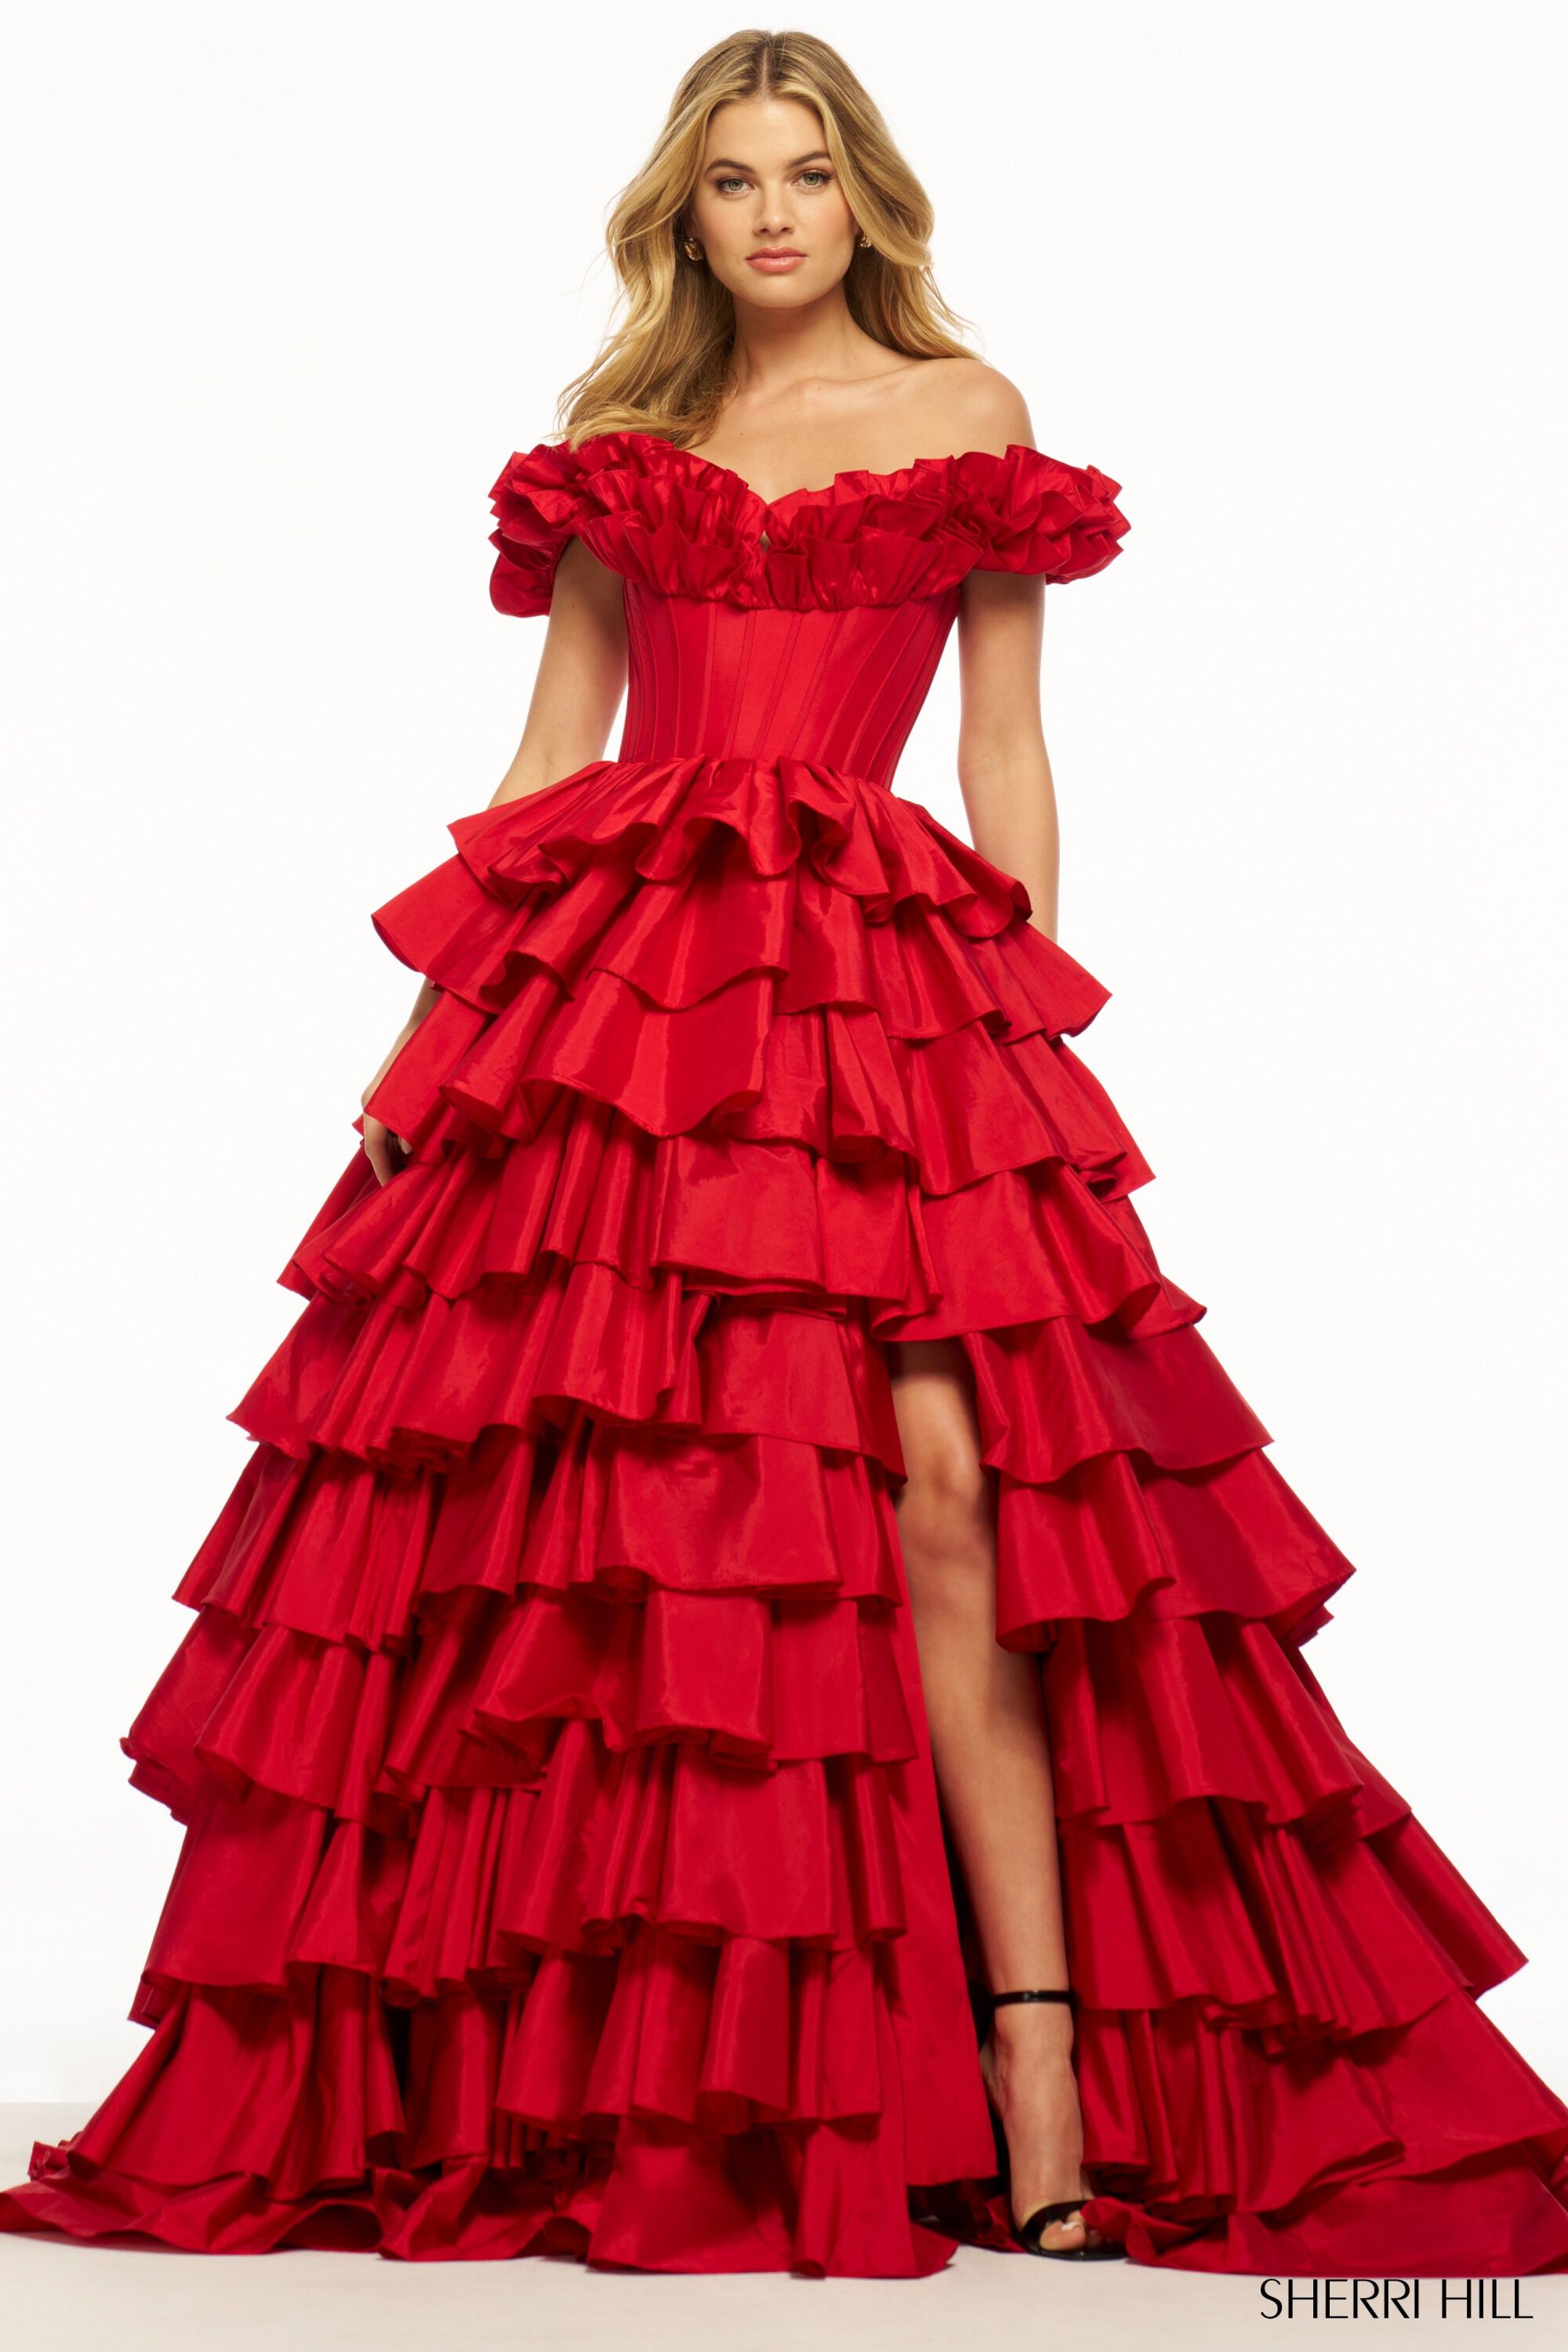 You love the red #sherrihill Lace Corset Gown, so of course we had